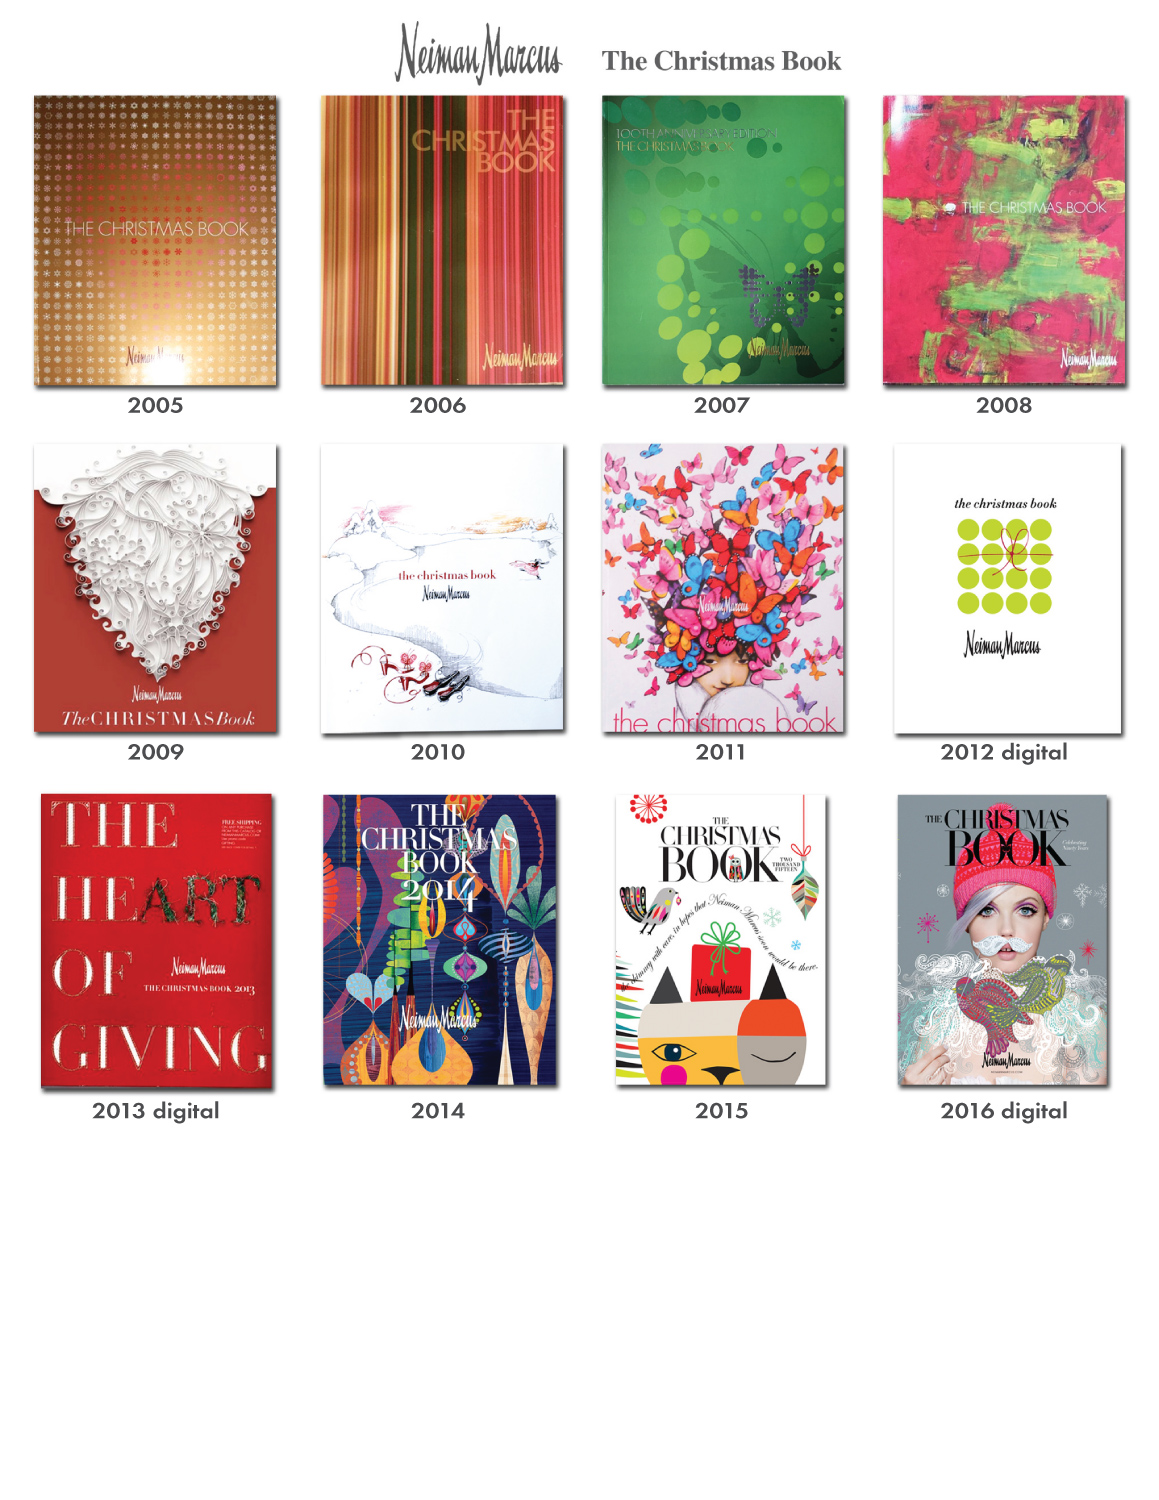 Reference Guide Collection of NM Neiman Marcus Holiday Christmas Book Catalog Covers 2005 - 2016